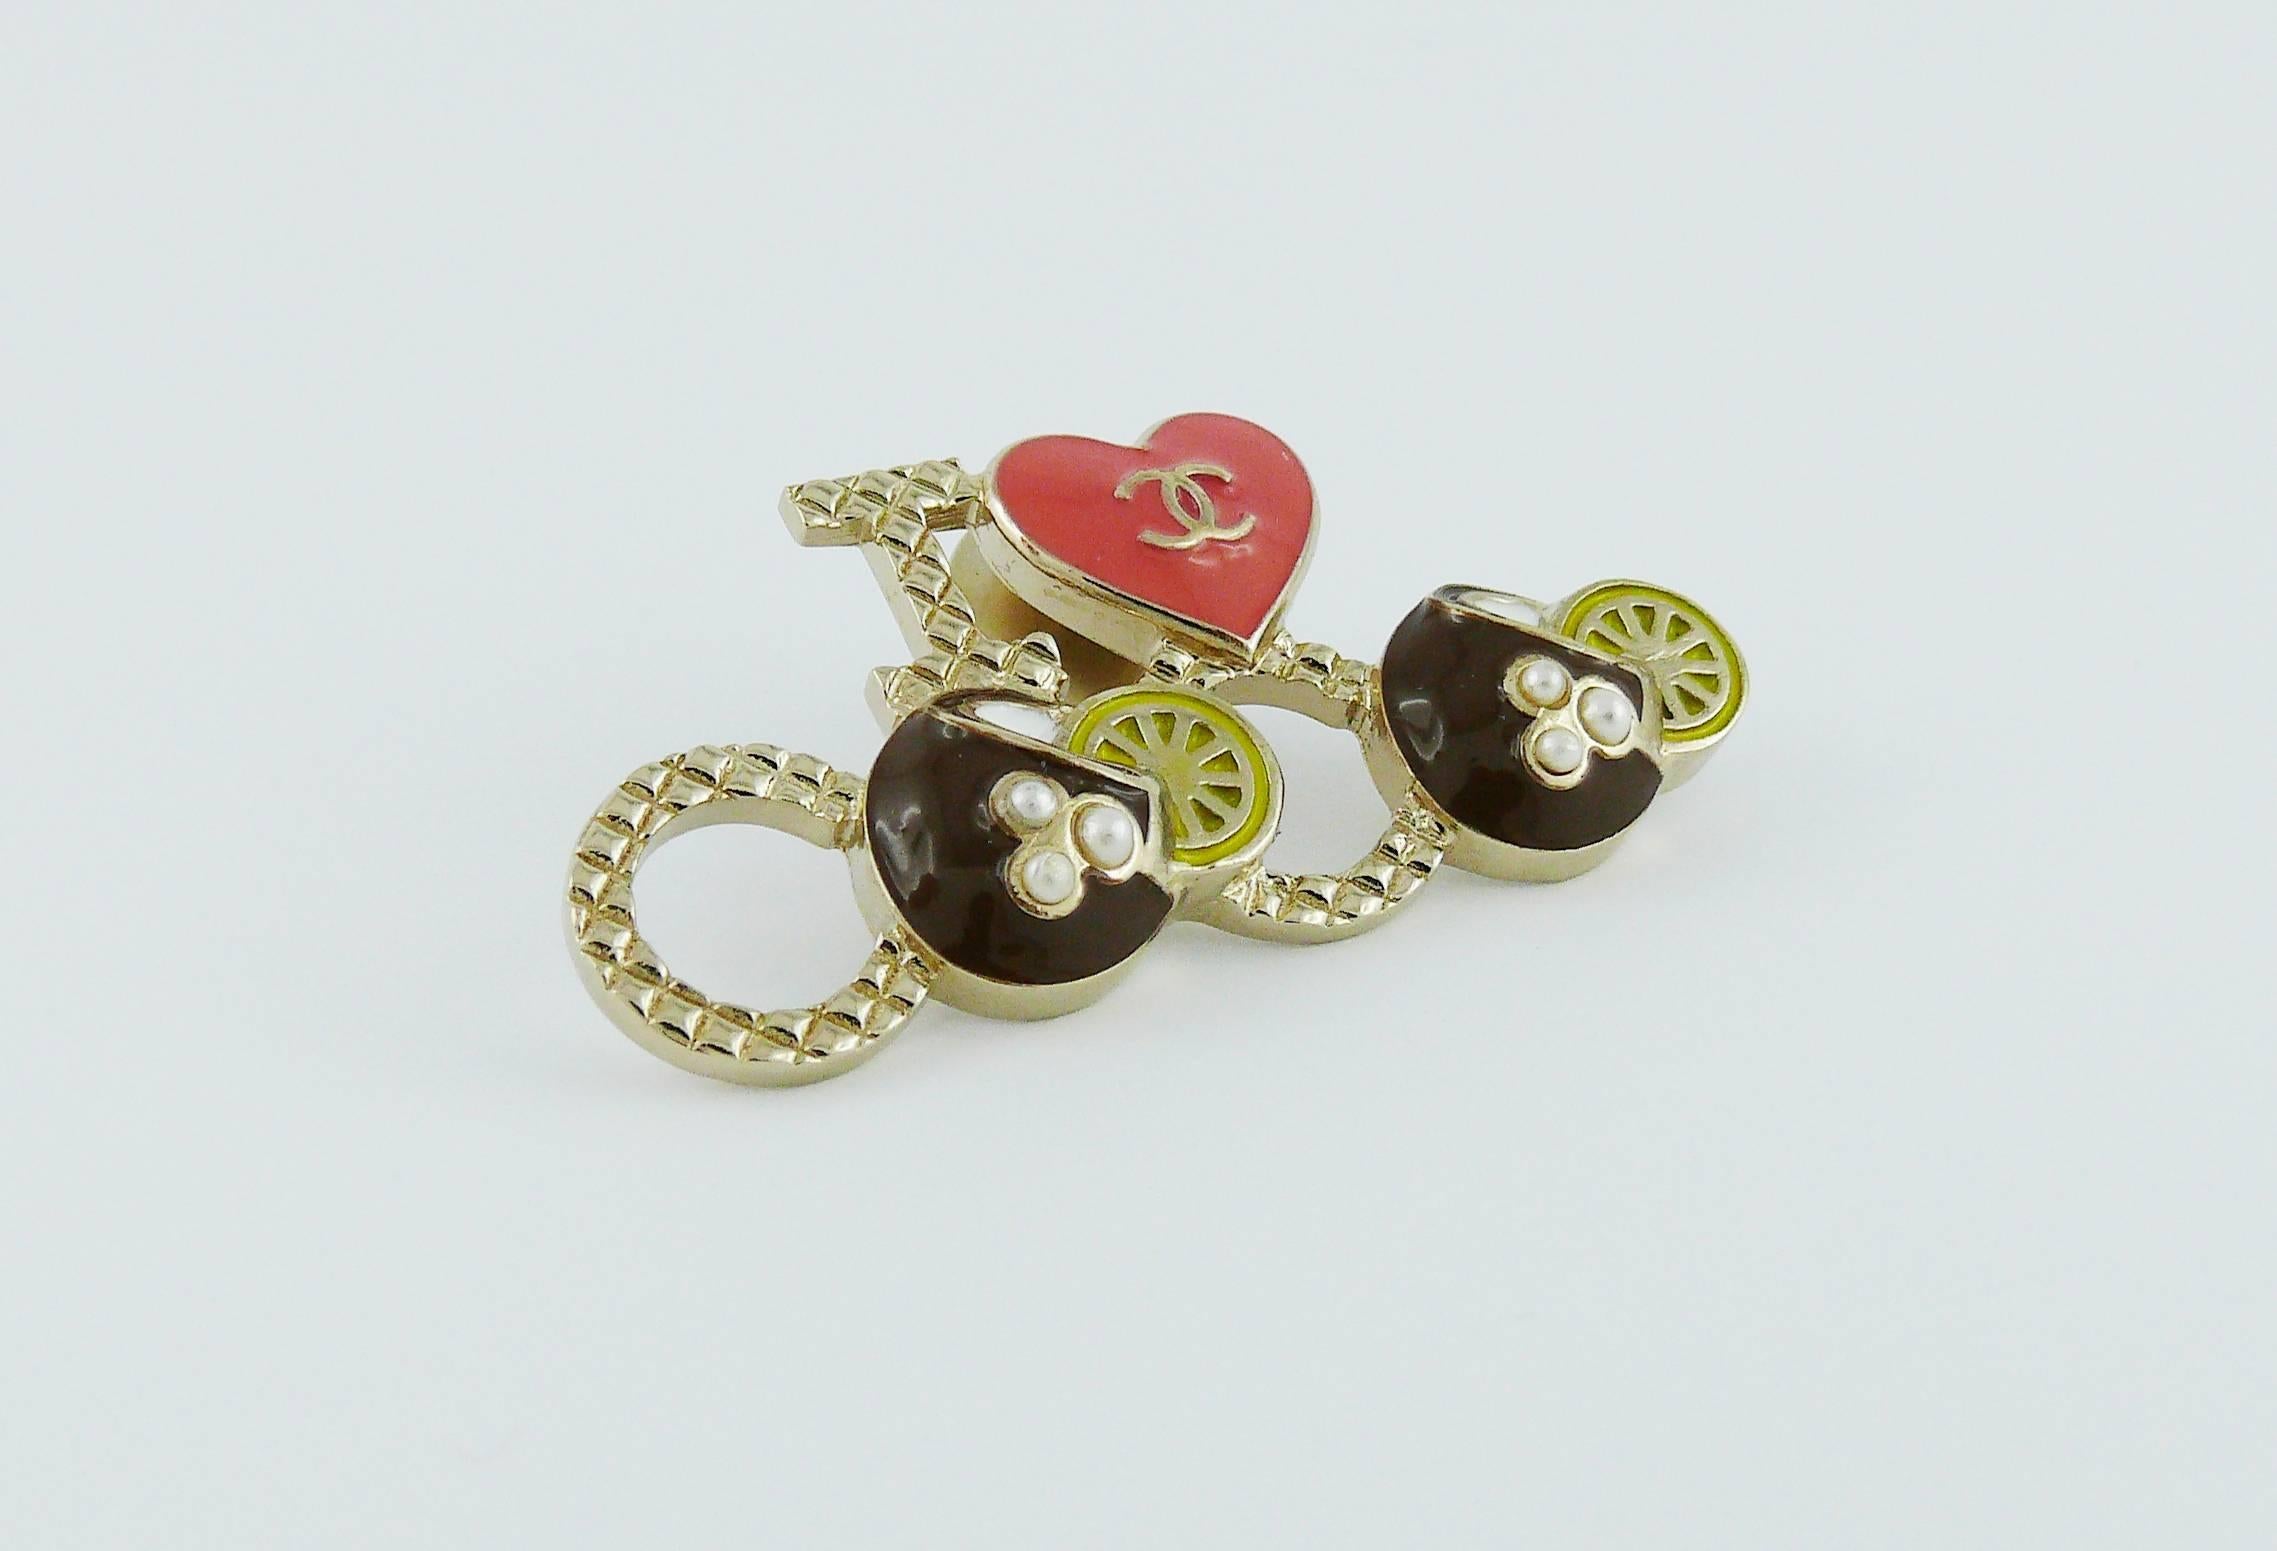 CHANEL "I Love Coco" CC brooch featuring multicolored enamel and faux pearls.

Laser stamping CHANEL G17 C Made in Italy.

Indicative measurements : length approx. 4.2 cm (1.65 inches) / height approx. 2.1 cm (0.83 inch).

Comes with